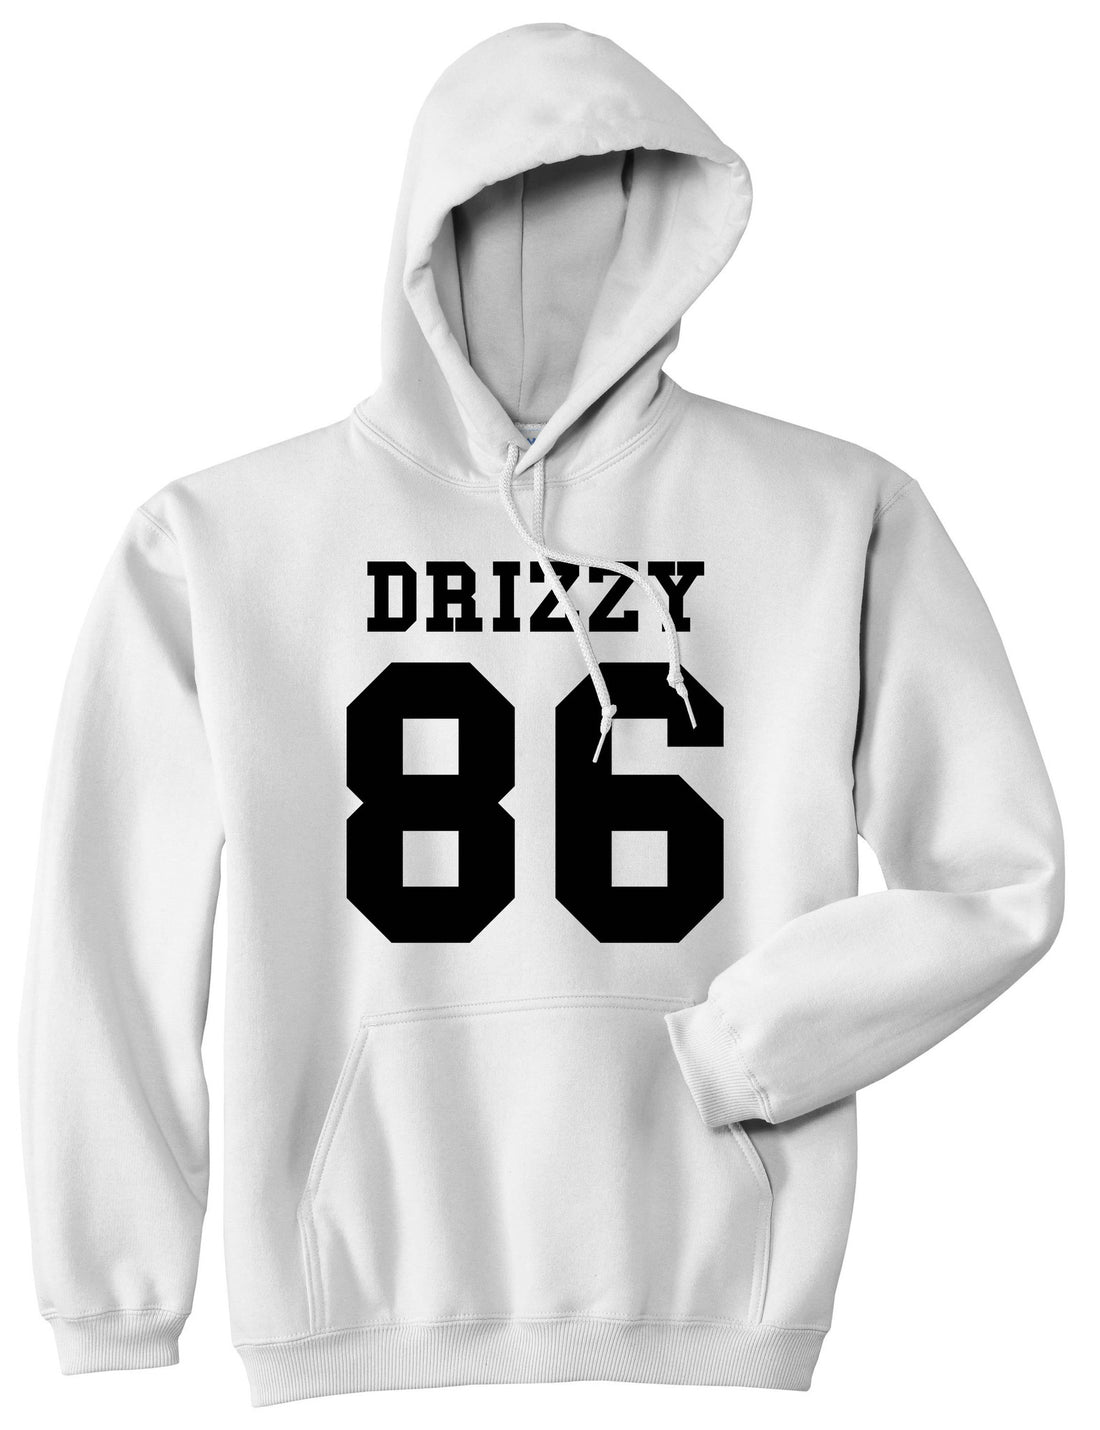 Drizzy 86 Team Jersey Pullover Hoodie Hoody in White by Kings Of NY